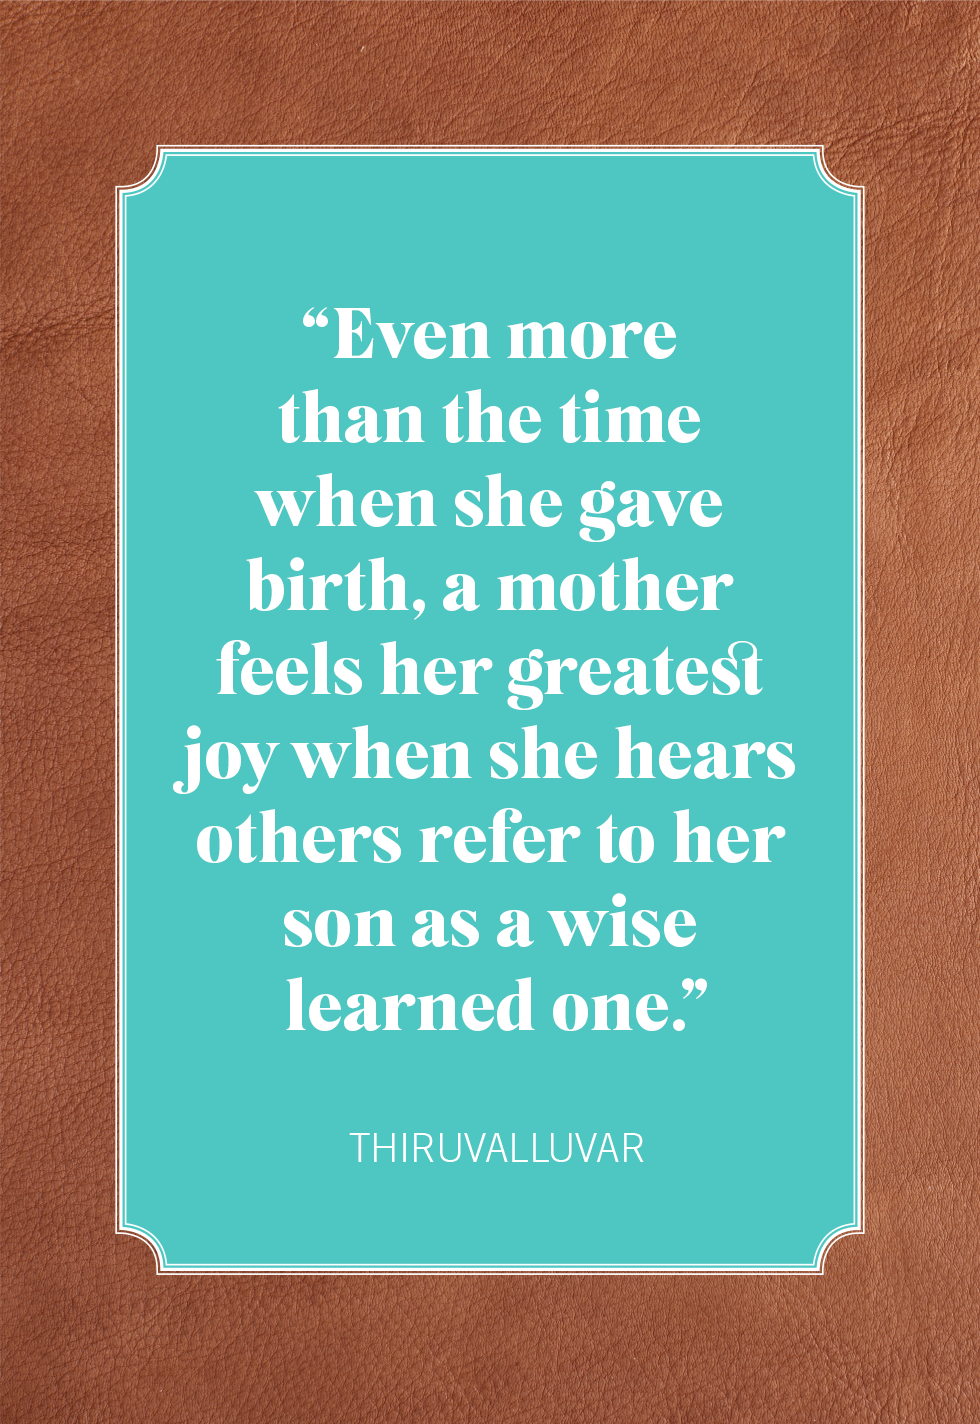 cute sayings for new moms